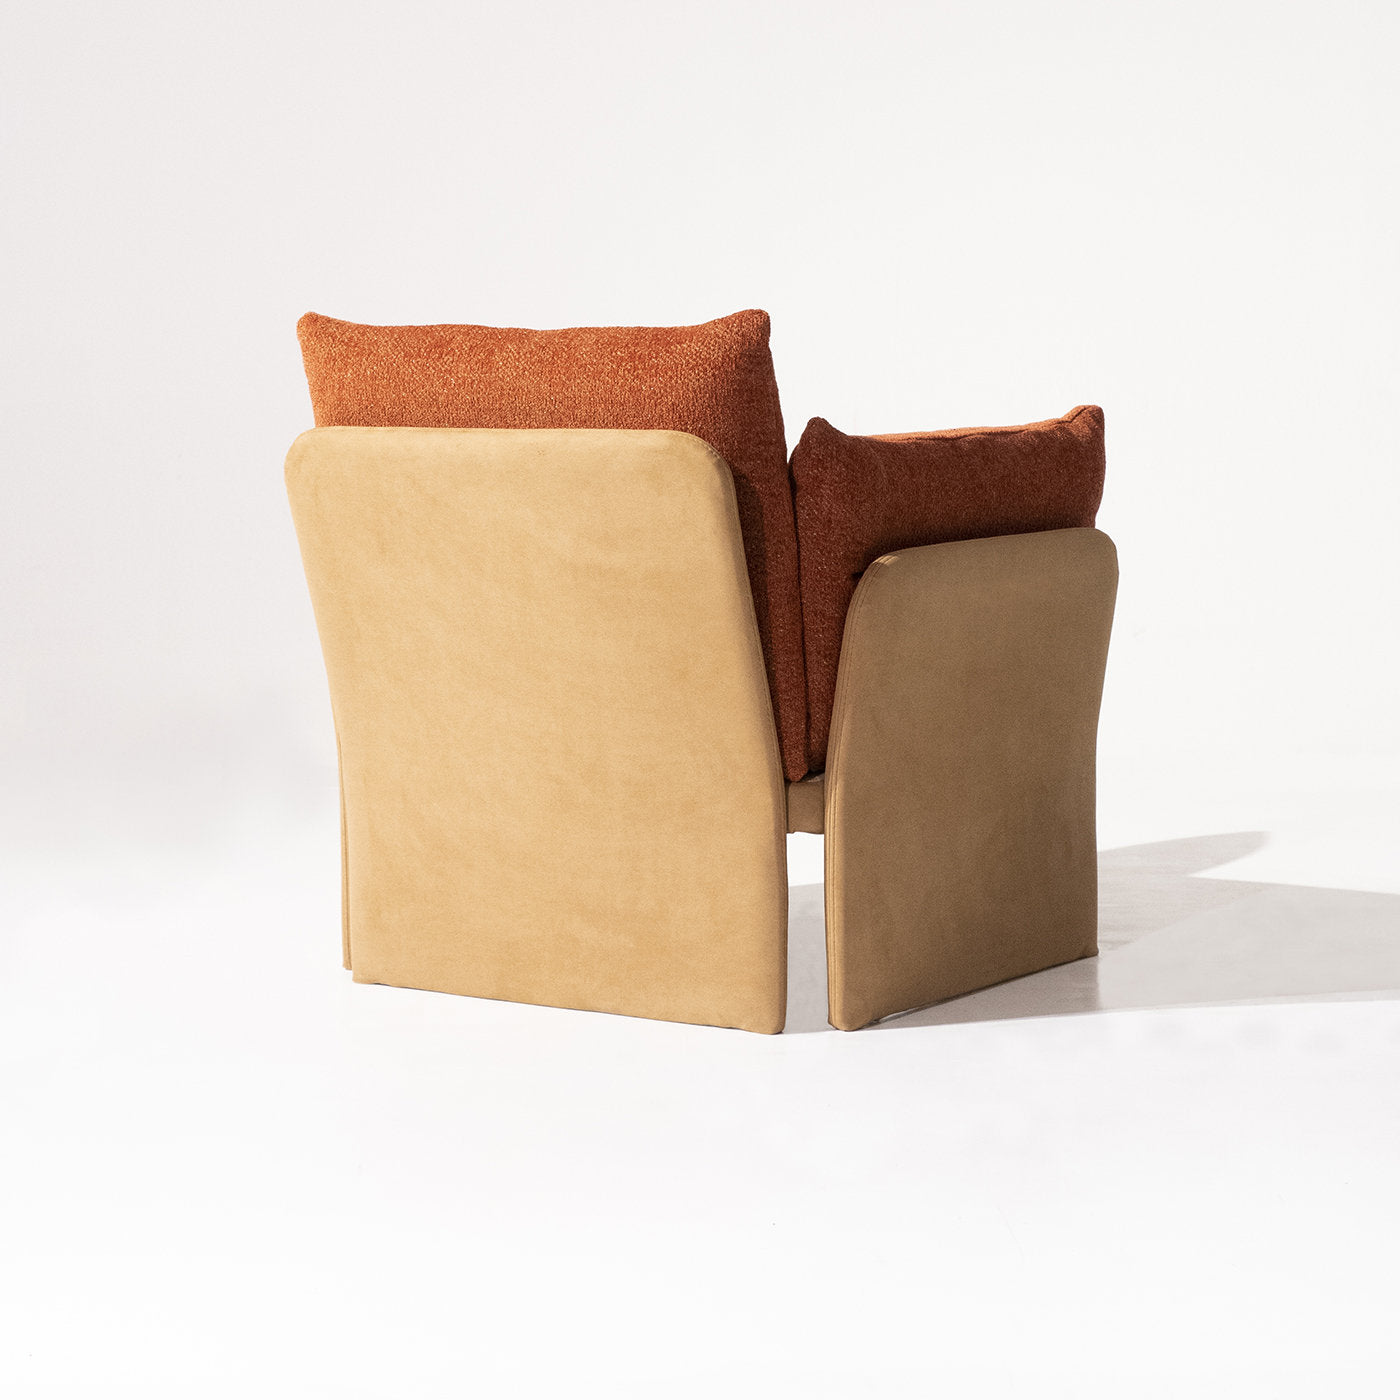 Farfalle Armchair Tribeca Collection by Marco and Giulio Mantellassi - Alternative view 2